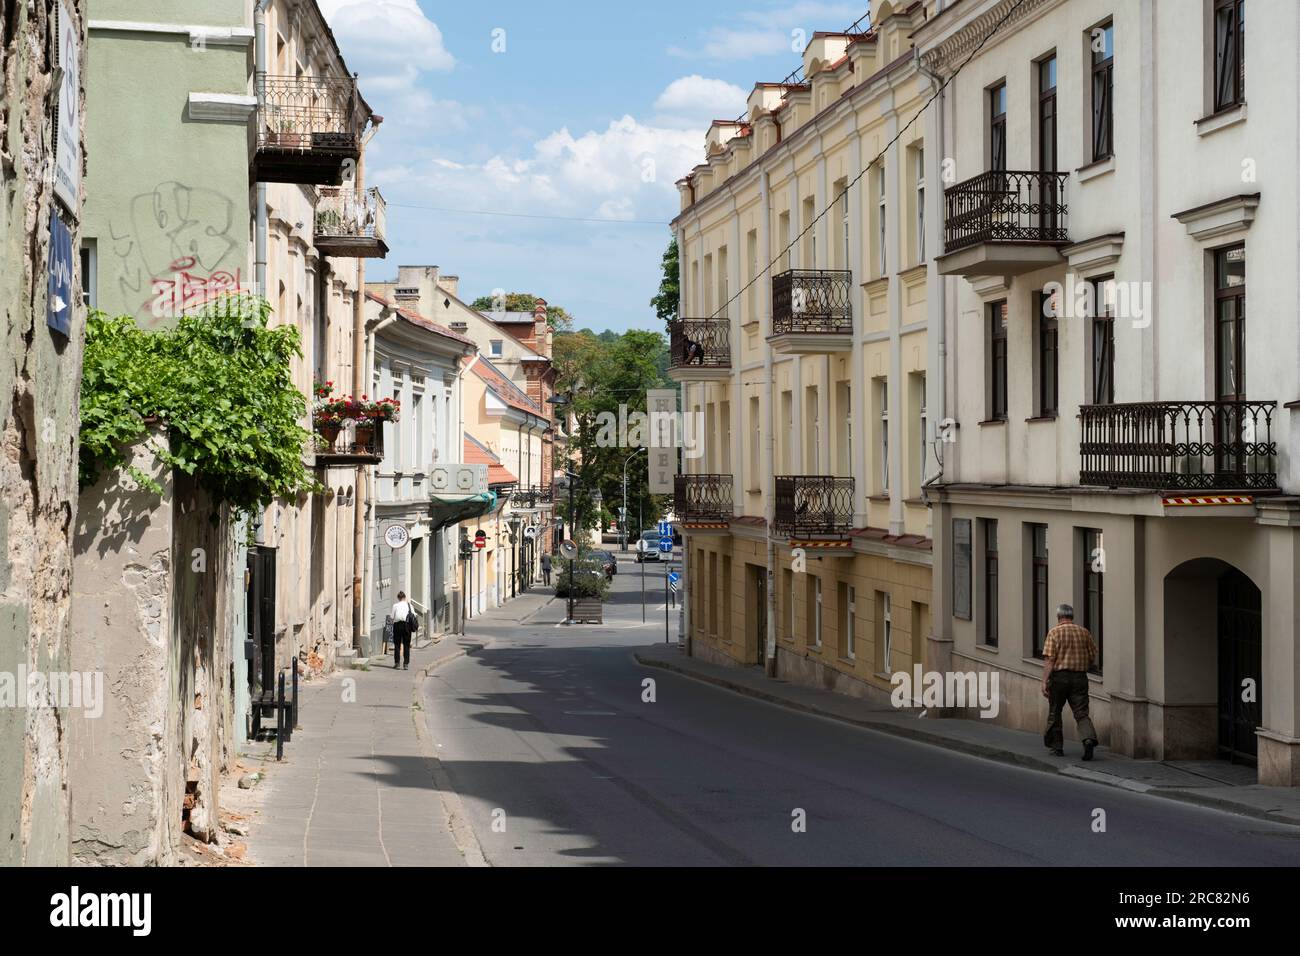 Descending street in Vilnius with facades of old historical buildings in pastel shades, many with balconies Stock Photo